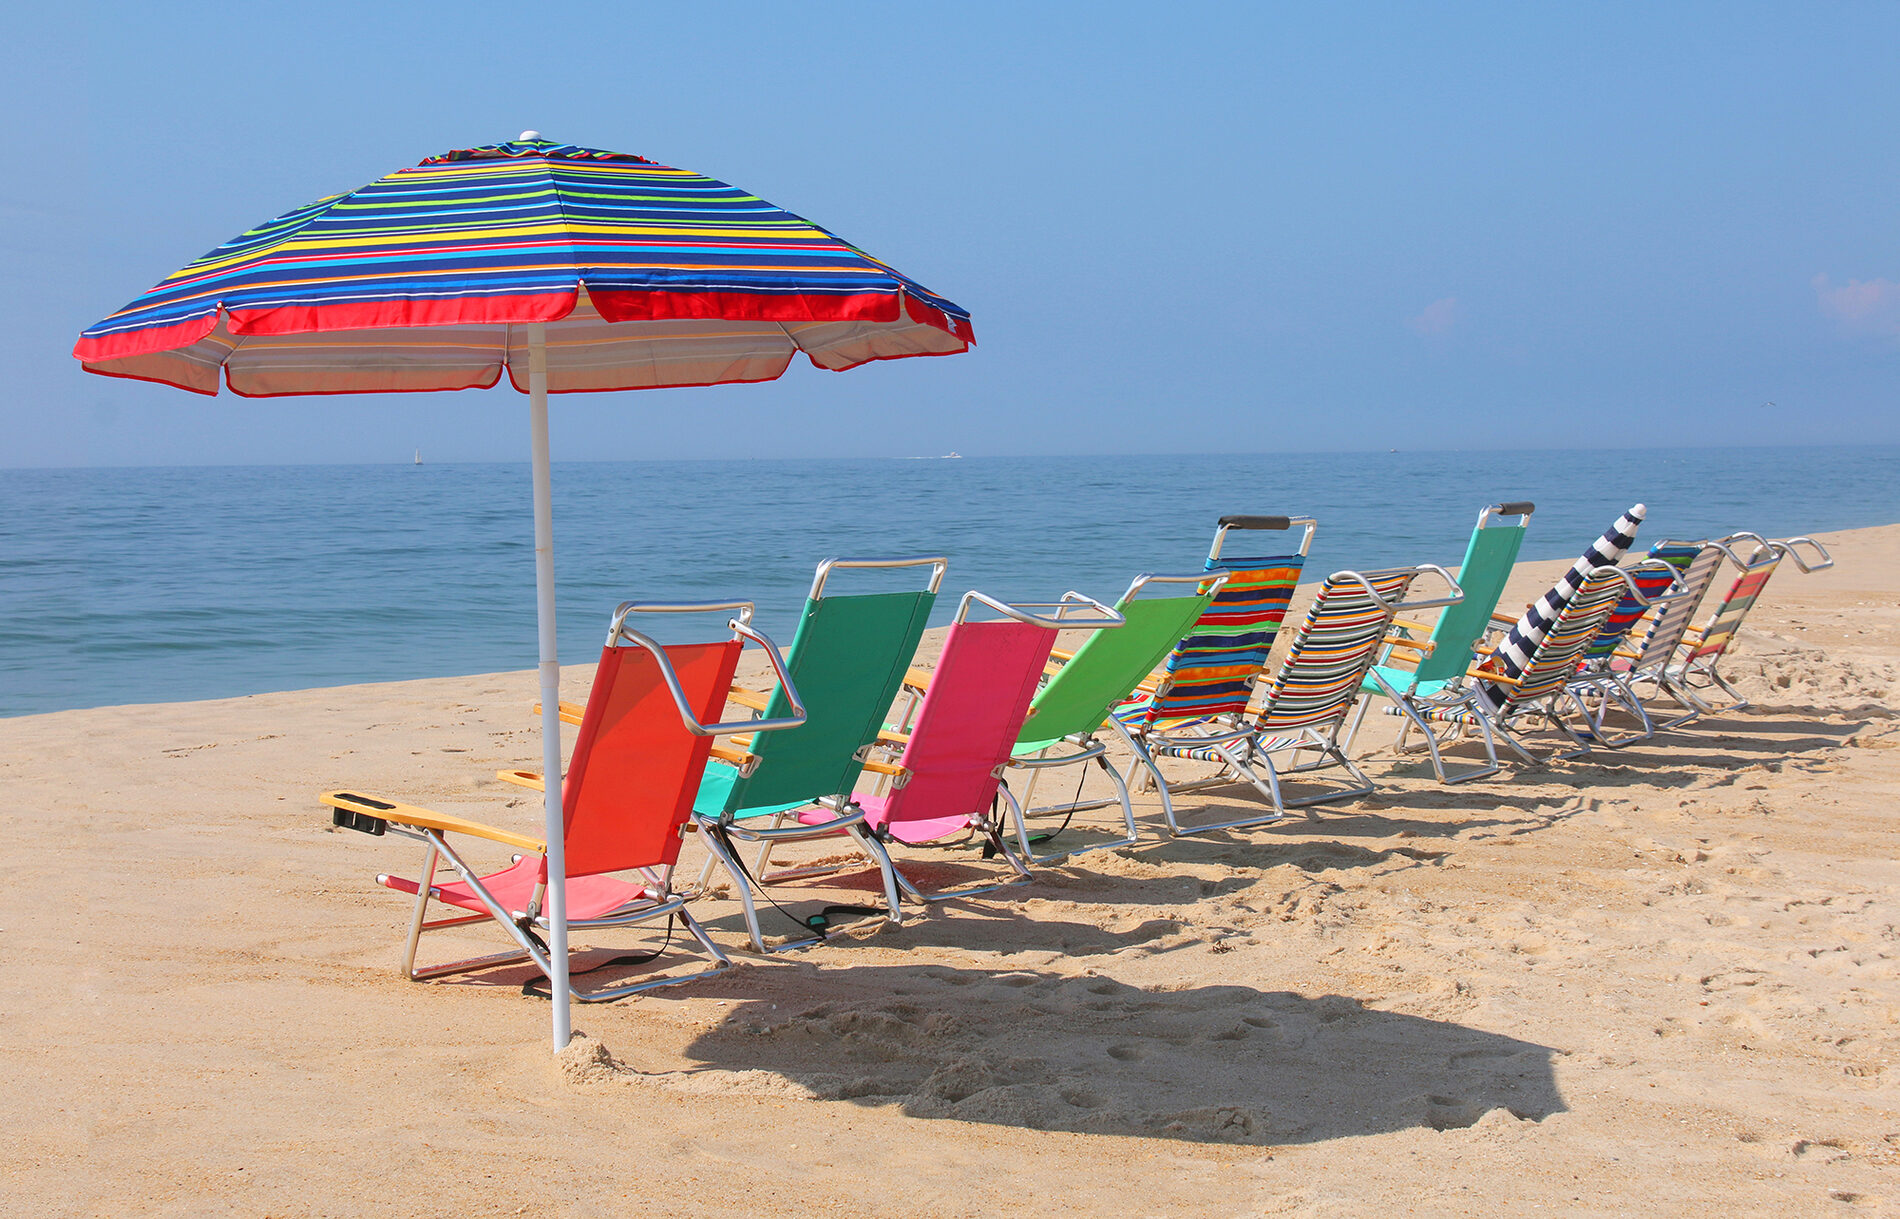 A row of beach chairs sitting on top of a sandy beach, a horizontally-striped beach umbrella standing at the end of the row.